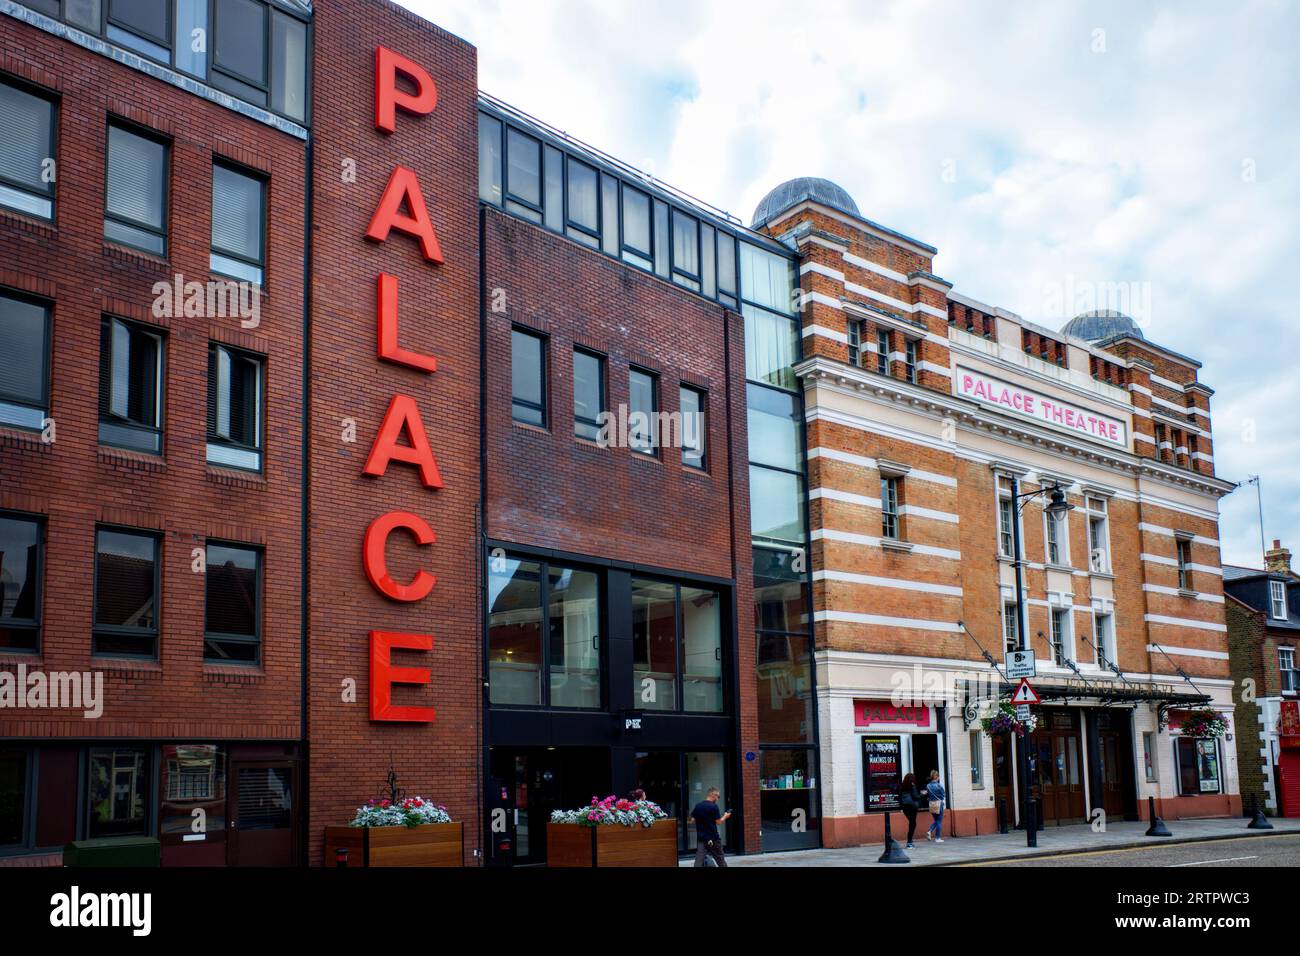 Palace Theatre, Clarendon Road, Watford, Hertfordshire, Angleterre, ROYAUME-UNI Banque D'Images